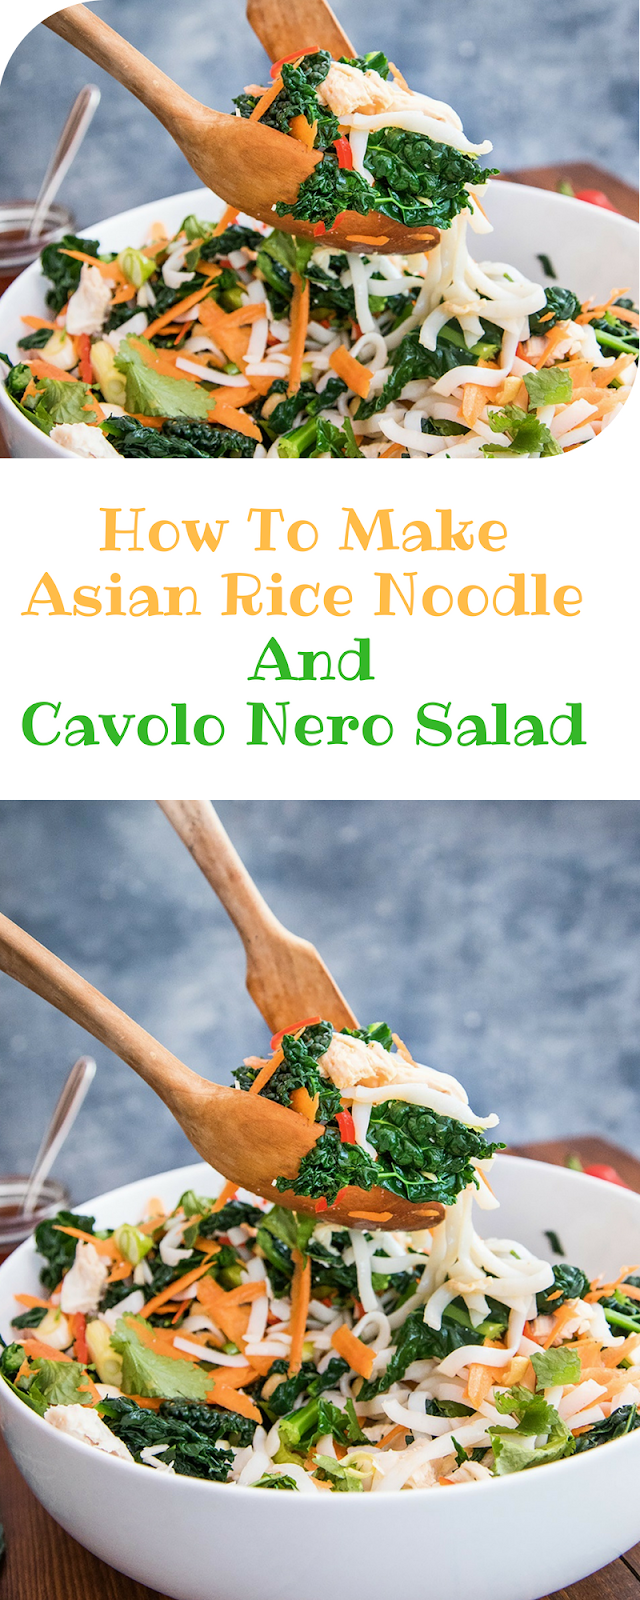 Asian Rice Noodle And Cavolo Nero Salad